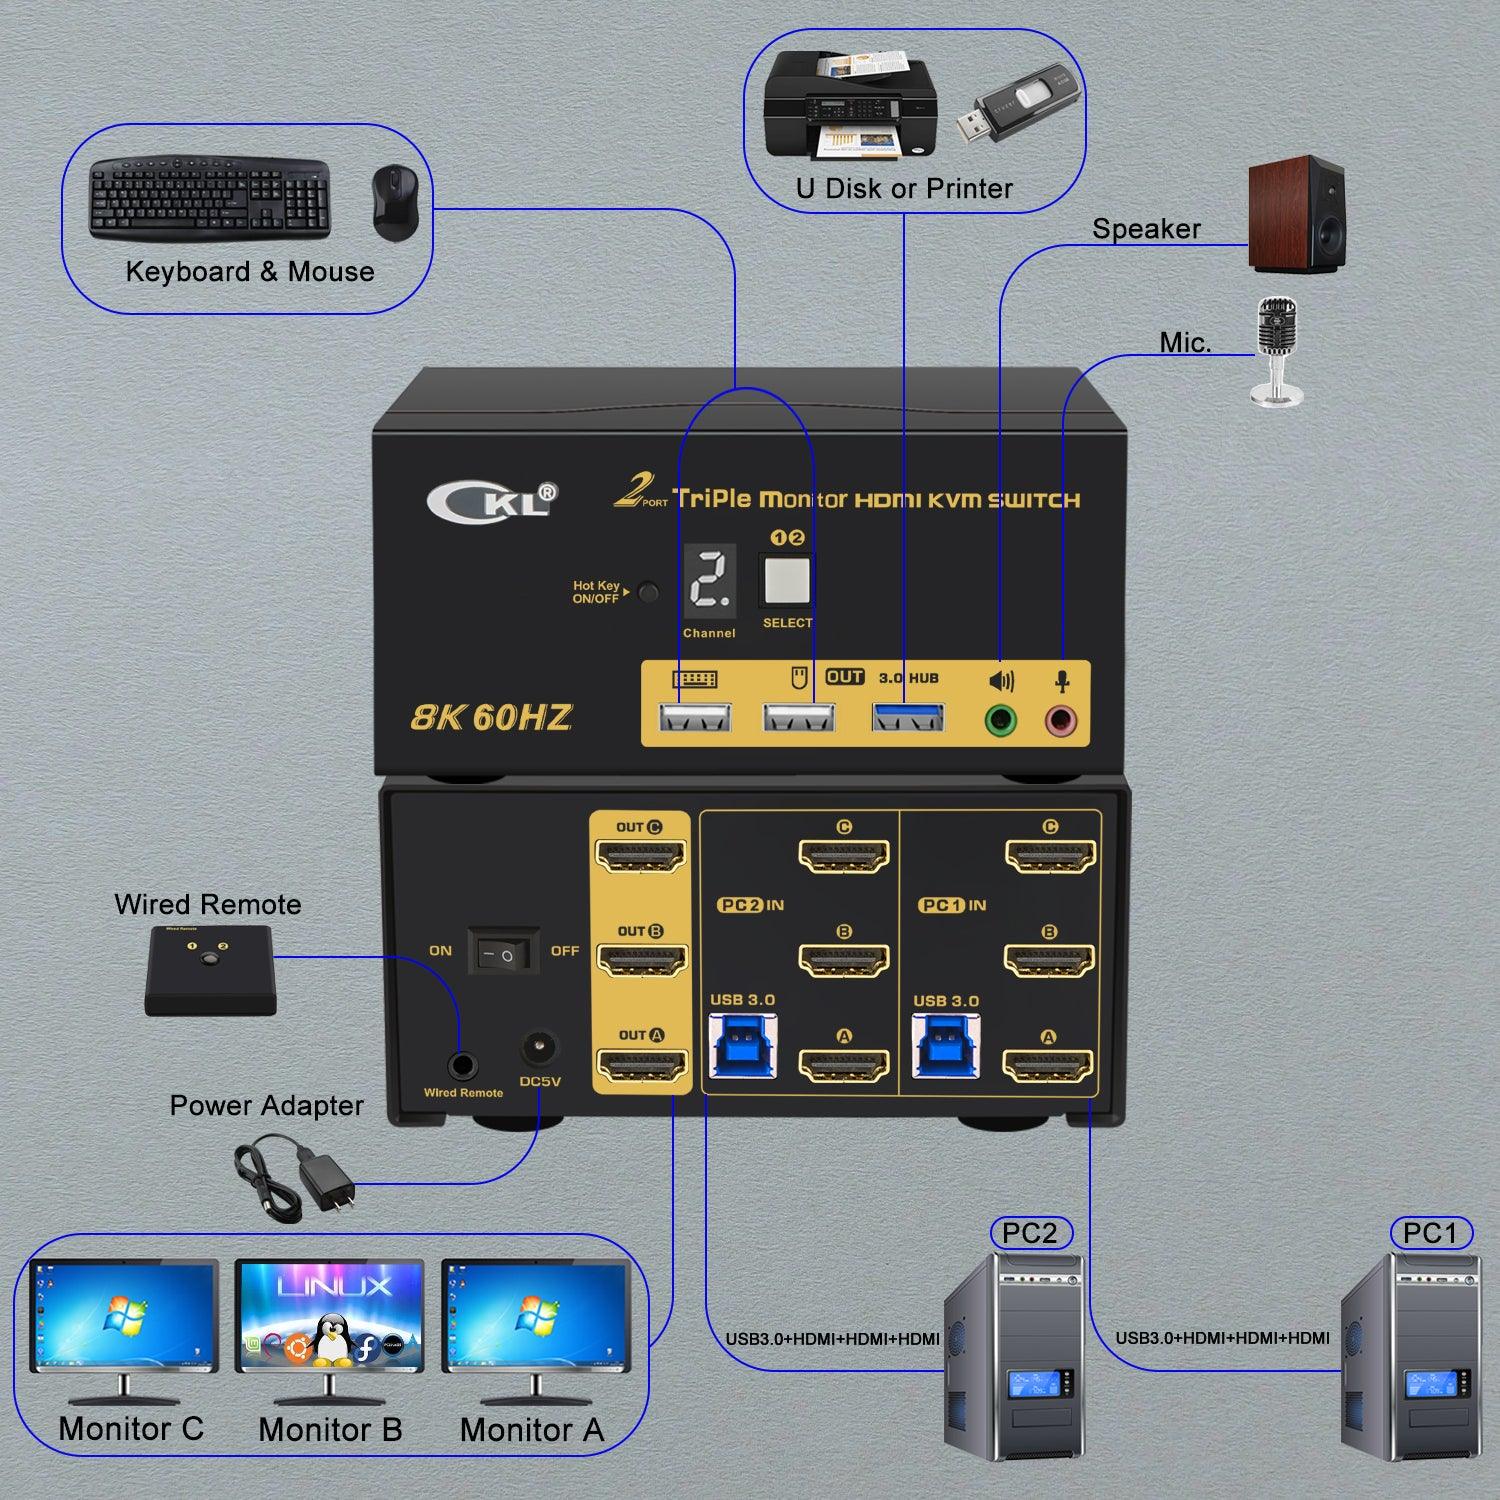 CKL 2 Port USB 3.0 KVM Switch Triple Monitor HDMI 2.1 8K 60Hz 4K 120Hz 144Hz with EDID, Keyboard Video Mouse Peripherals Switcher for 2 Computers 3 Monitors with Cables and Audio CKL-923HUA-5 - CKL KVM Switches